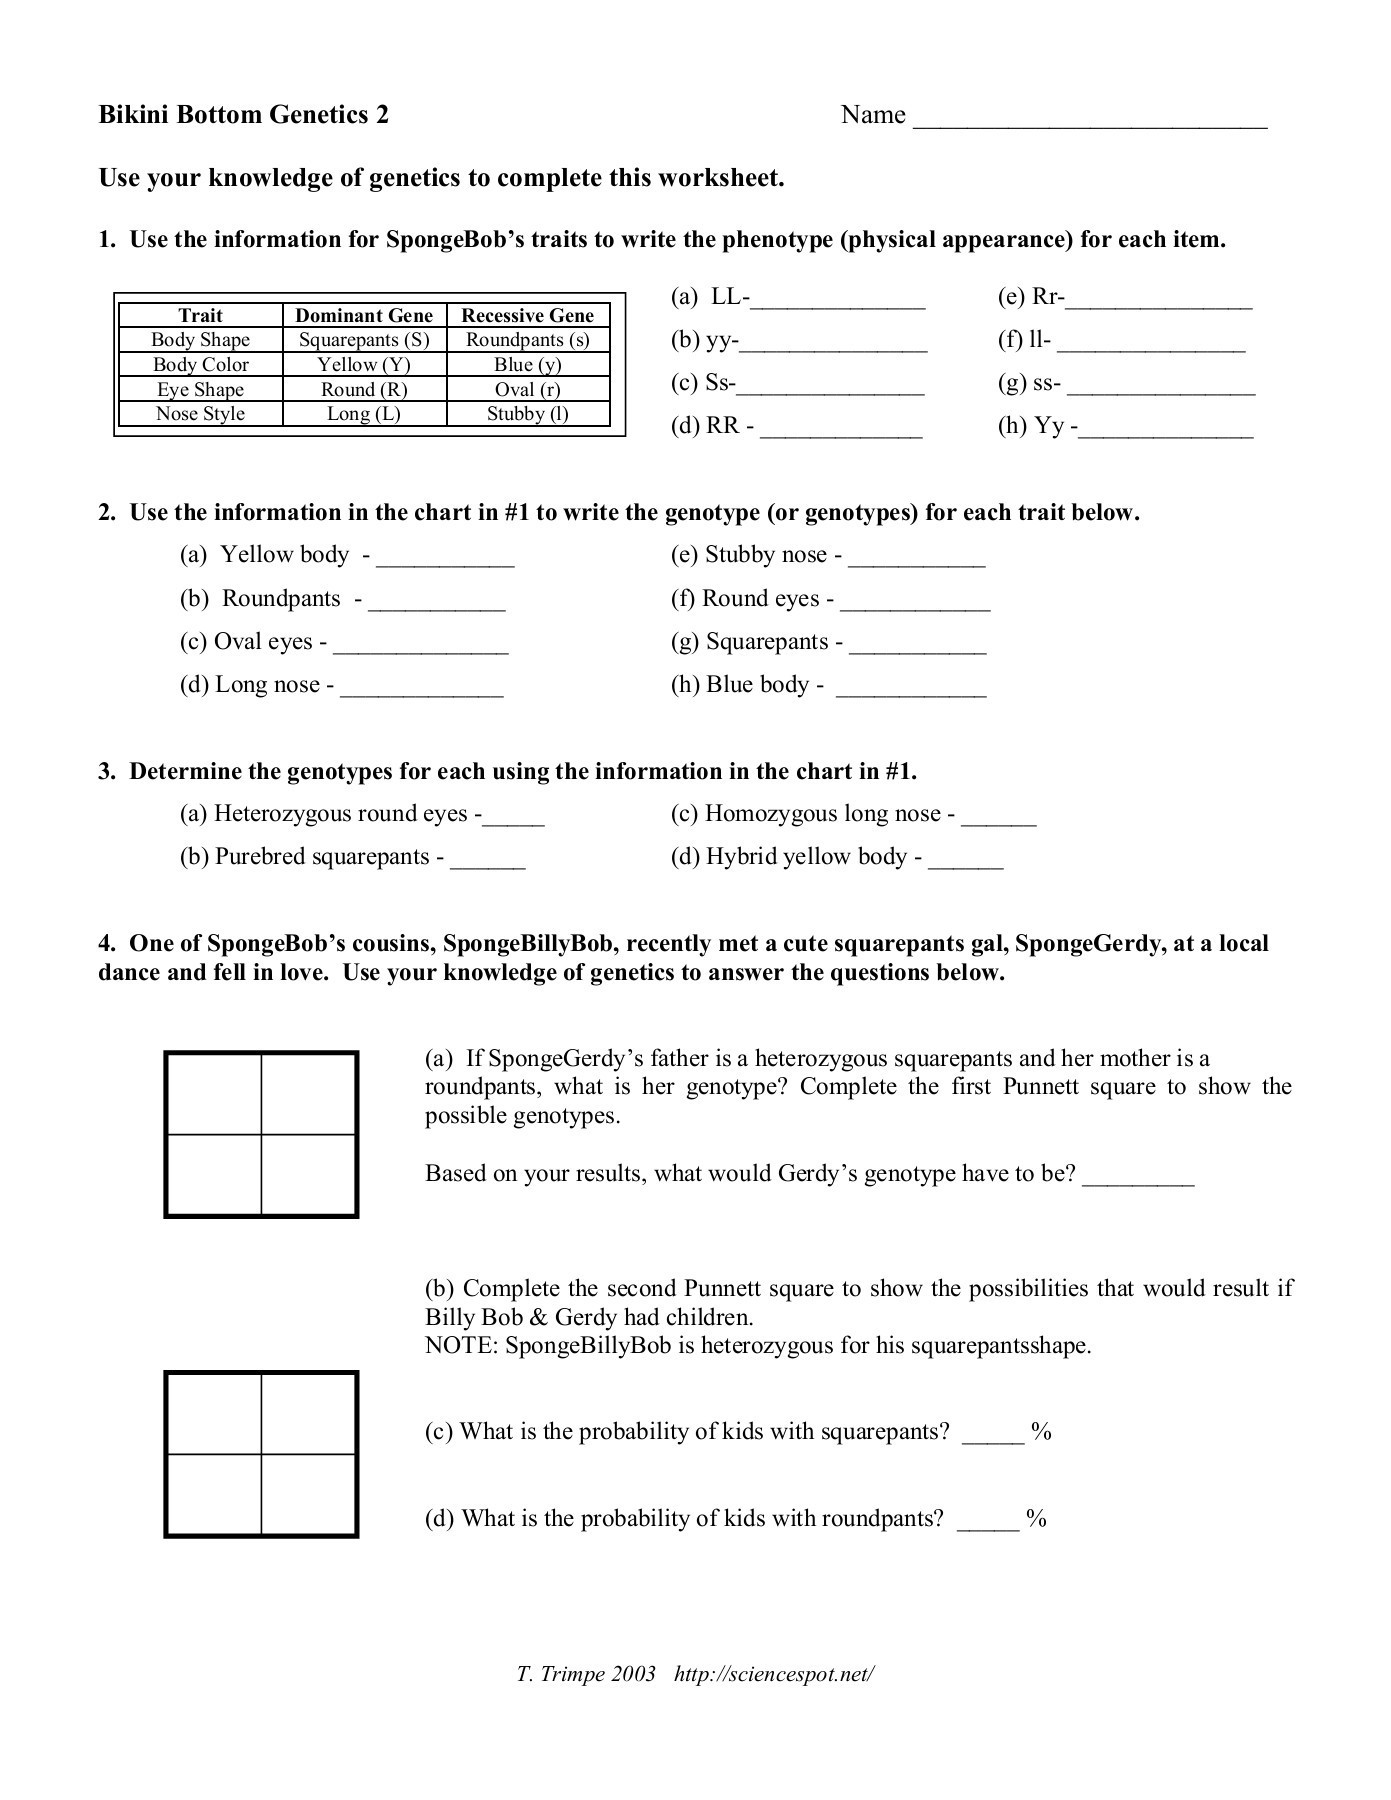 Genotypes and Phenotypes Worksheet Use Your Knowledge Of Genetics to Plete This Worksheet